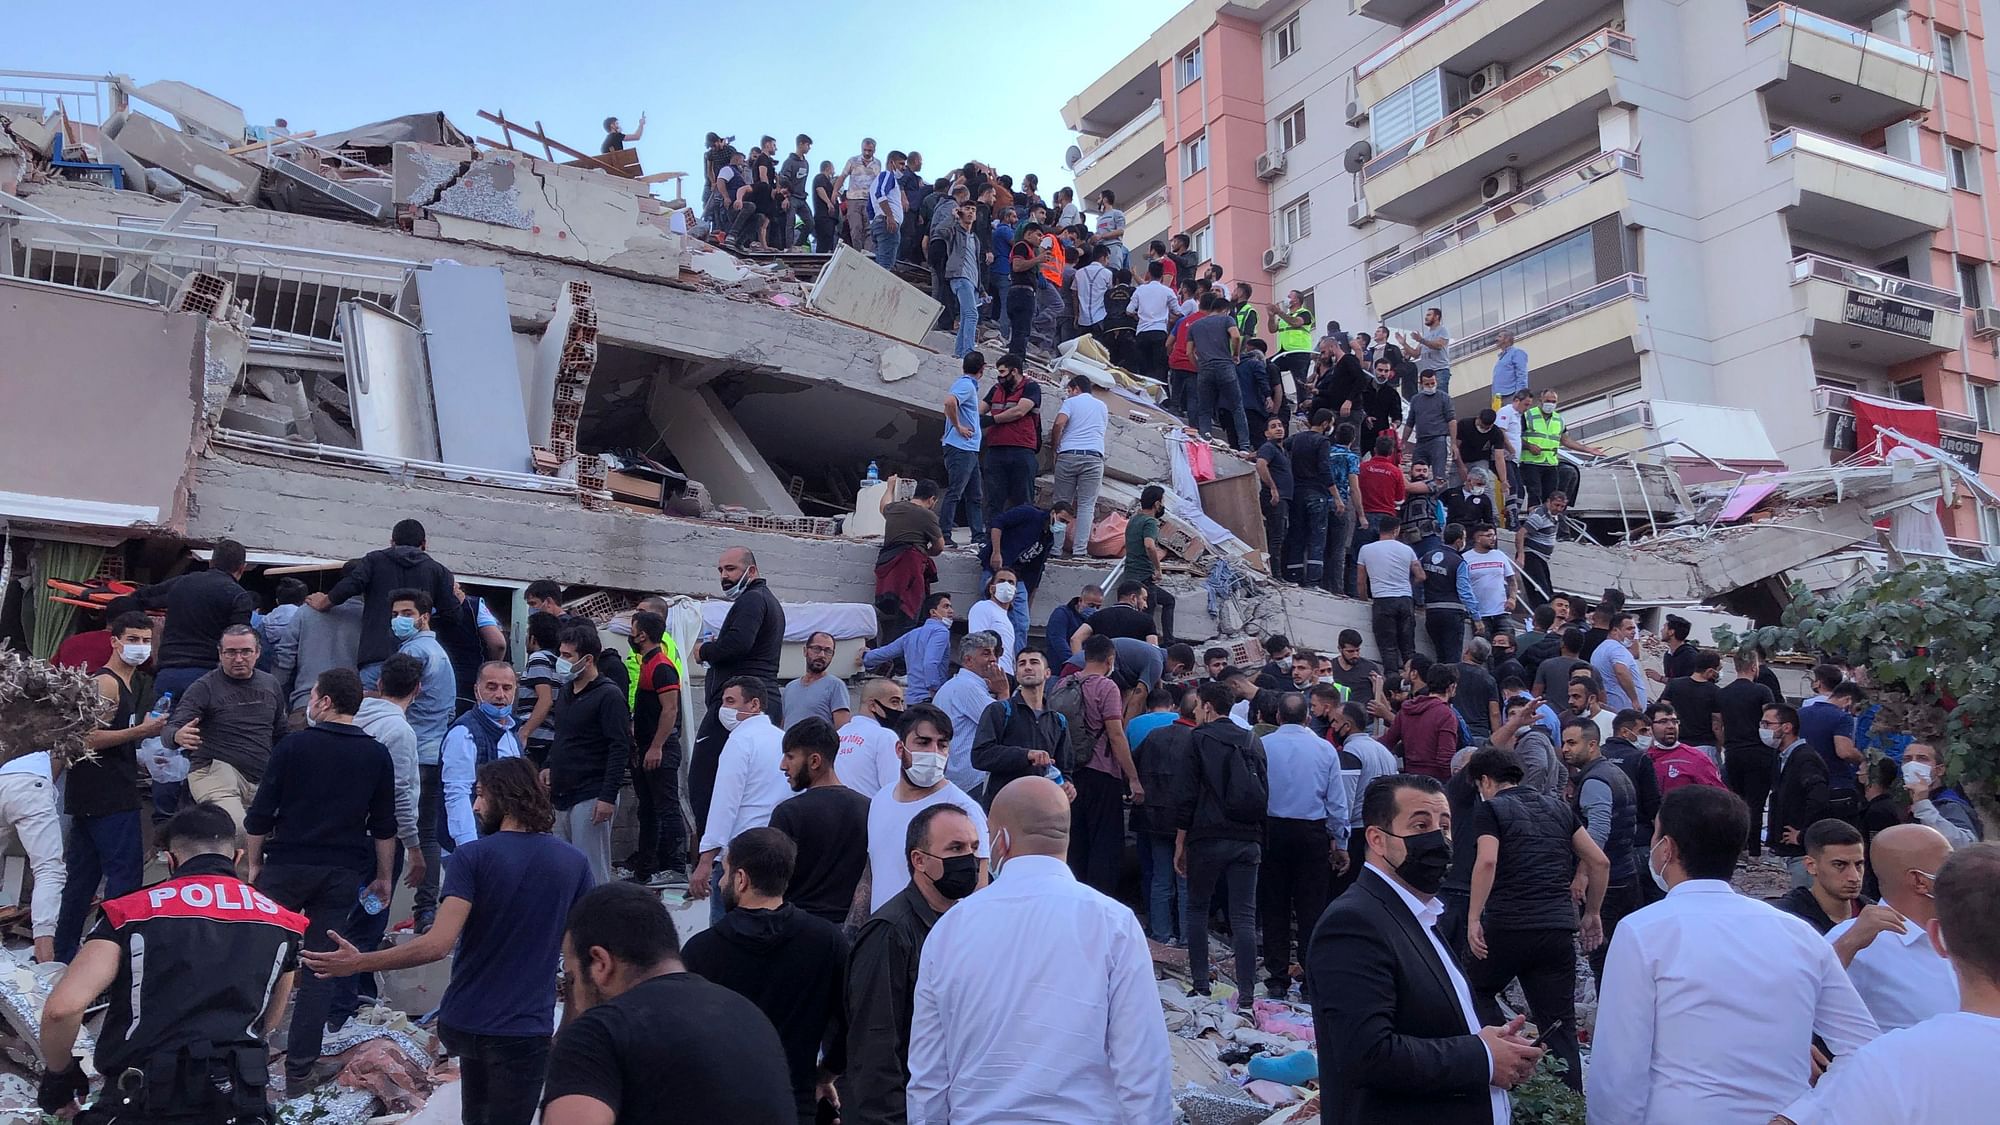 Rescue workers and local people try to reach residents trapped in the debris of a collapsed building, in Izmir, Turkey, Friday, Oct. 30, 2020, after a strong earthquake in the Aegean Sea has shaken Turkey and Greece.